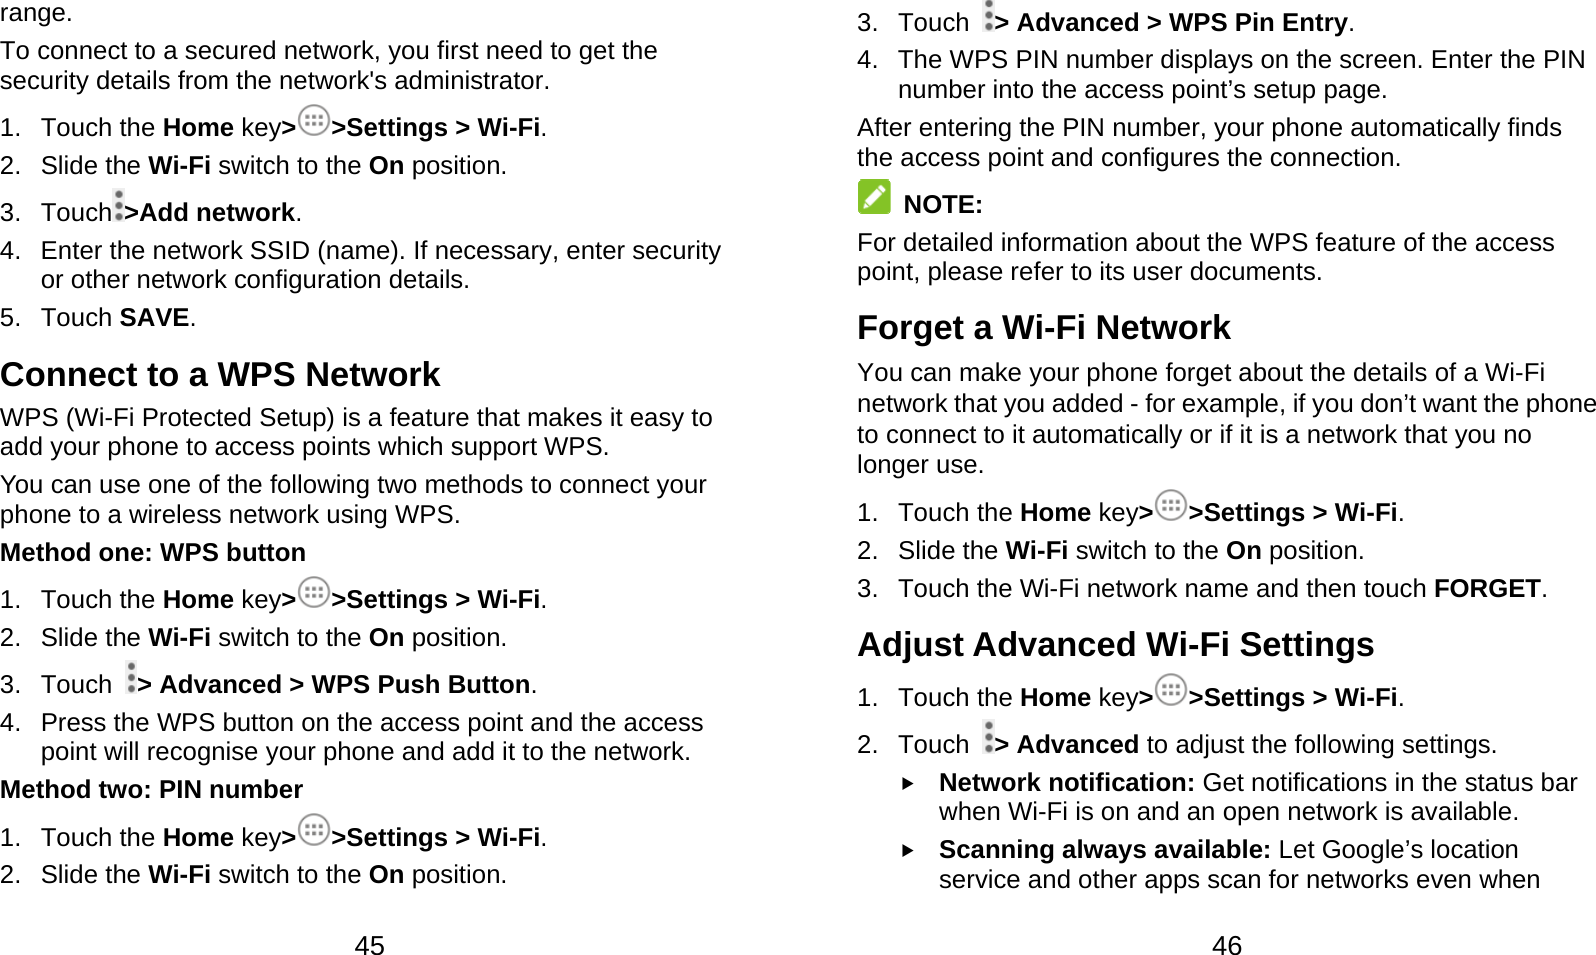  45 range. To connect to a secured network, you first need to get the security details from the network&apos;s administrator. 1. Touch the Home key&gt;&gt;Settings &gt; Wi-Fi. 2. Slide the Wi-Fi switch to the On position. 3. Touch &gt;Add network. 4.  Enter the network SSID (name). If necessary, enter security or other network configuration details. 5. Touch SAVE. Connect to a WPS Network WPS (Wi-Fi Protected Setup) is a feature that makes it easy to add your phone to access points which support WPS. You can use one of the following two methods to connect your phone to a wireless network using WPS. Method one: WPS button 1. Touch the Home key&gt;&gt;Settings &gt; Wi-Fi. 2. Slide the Wi-Fi switch to the On position. 3. Touch  &gt; Advanced &gt; WPS Push Button. 4.  Press the WPS button on the access point and the access point will recognise your phone and add it to the network. Method two: PIN number 1. Touch the Home key&gt;&gt;Settings &gt; Wi-Fi. 2. Slide the Wi-Fi switch to the On position.  46 3. Touch  &gt; Advanced &gt; WPS Pin Entry. 4.  The WPS PIN number displays on the screen. Enter the PIN number into the access point’s setup page. After entering the PIN number, your phone automatically finds the access point and configures the connection.  NOTE: For detailed information about the WPS feature of the access point, please refer to its user documents. Forget a Wi-Fi Network You can make your phone forget about the details of a Wi-Fi network that you added - for example, if you don’t want the phone to connect to it automatically or if it is a network that you no longer use. 1. Touch the Home key&gt;&gt;Settings &gt; Wi-Fi. 2. Slide the Wi-Fi switch to the On position. 3.  Touch the Wi-Fi network name and then touch FORGET. Adjust Advanced Wi-Fi Settings 1. Touch the Home key&gt;&gt;Settings &gt; Wi-Fi. 2. Touch  &gt; Advanced to adjust the following settings.  Network notification: Get notifications in the status bar when Wi-Fi is on and an open network is available.  Scanning always available: Let Google’s location service and other apps scan for networks even when 